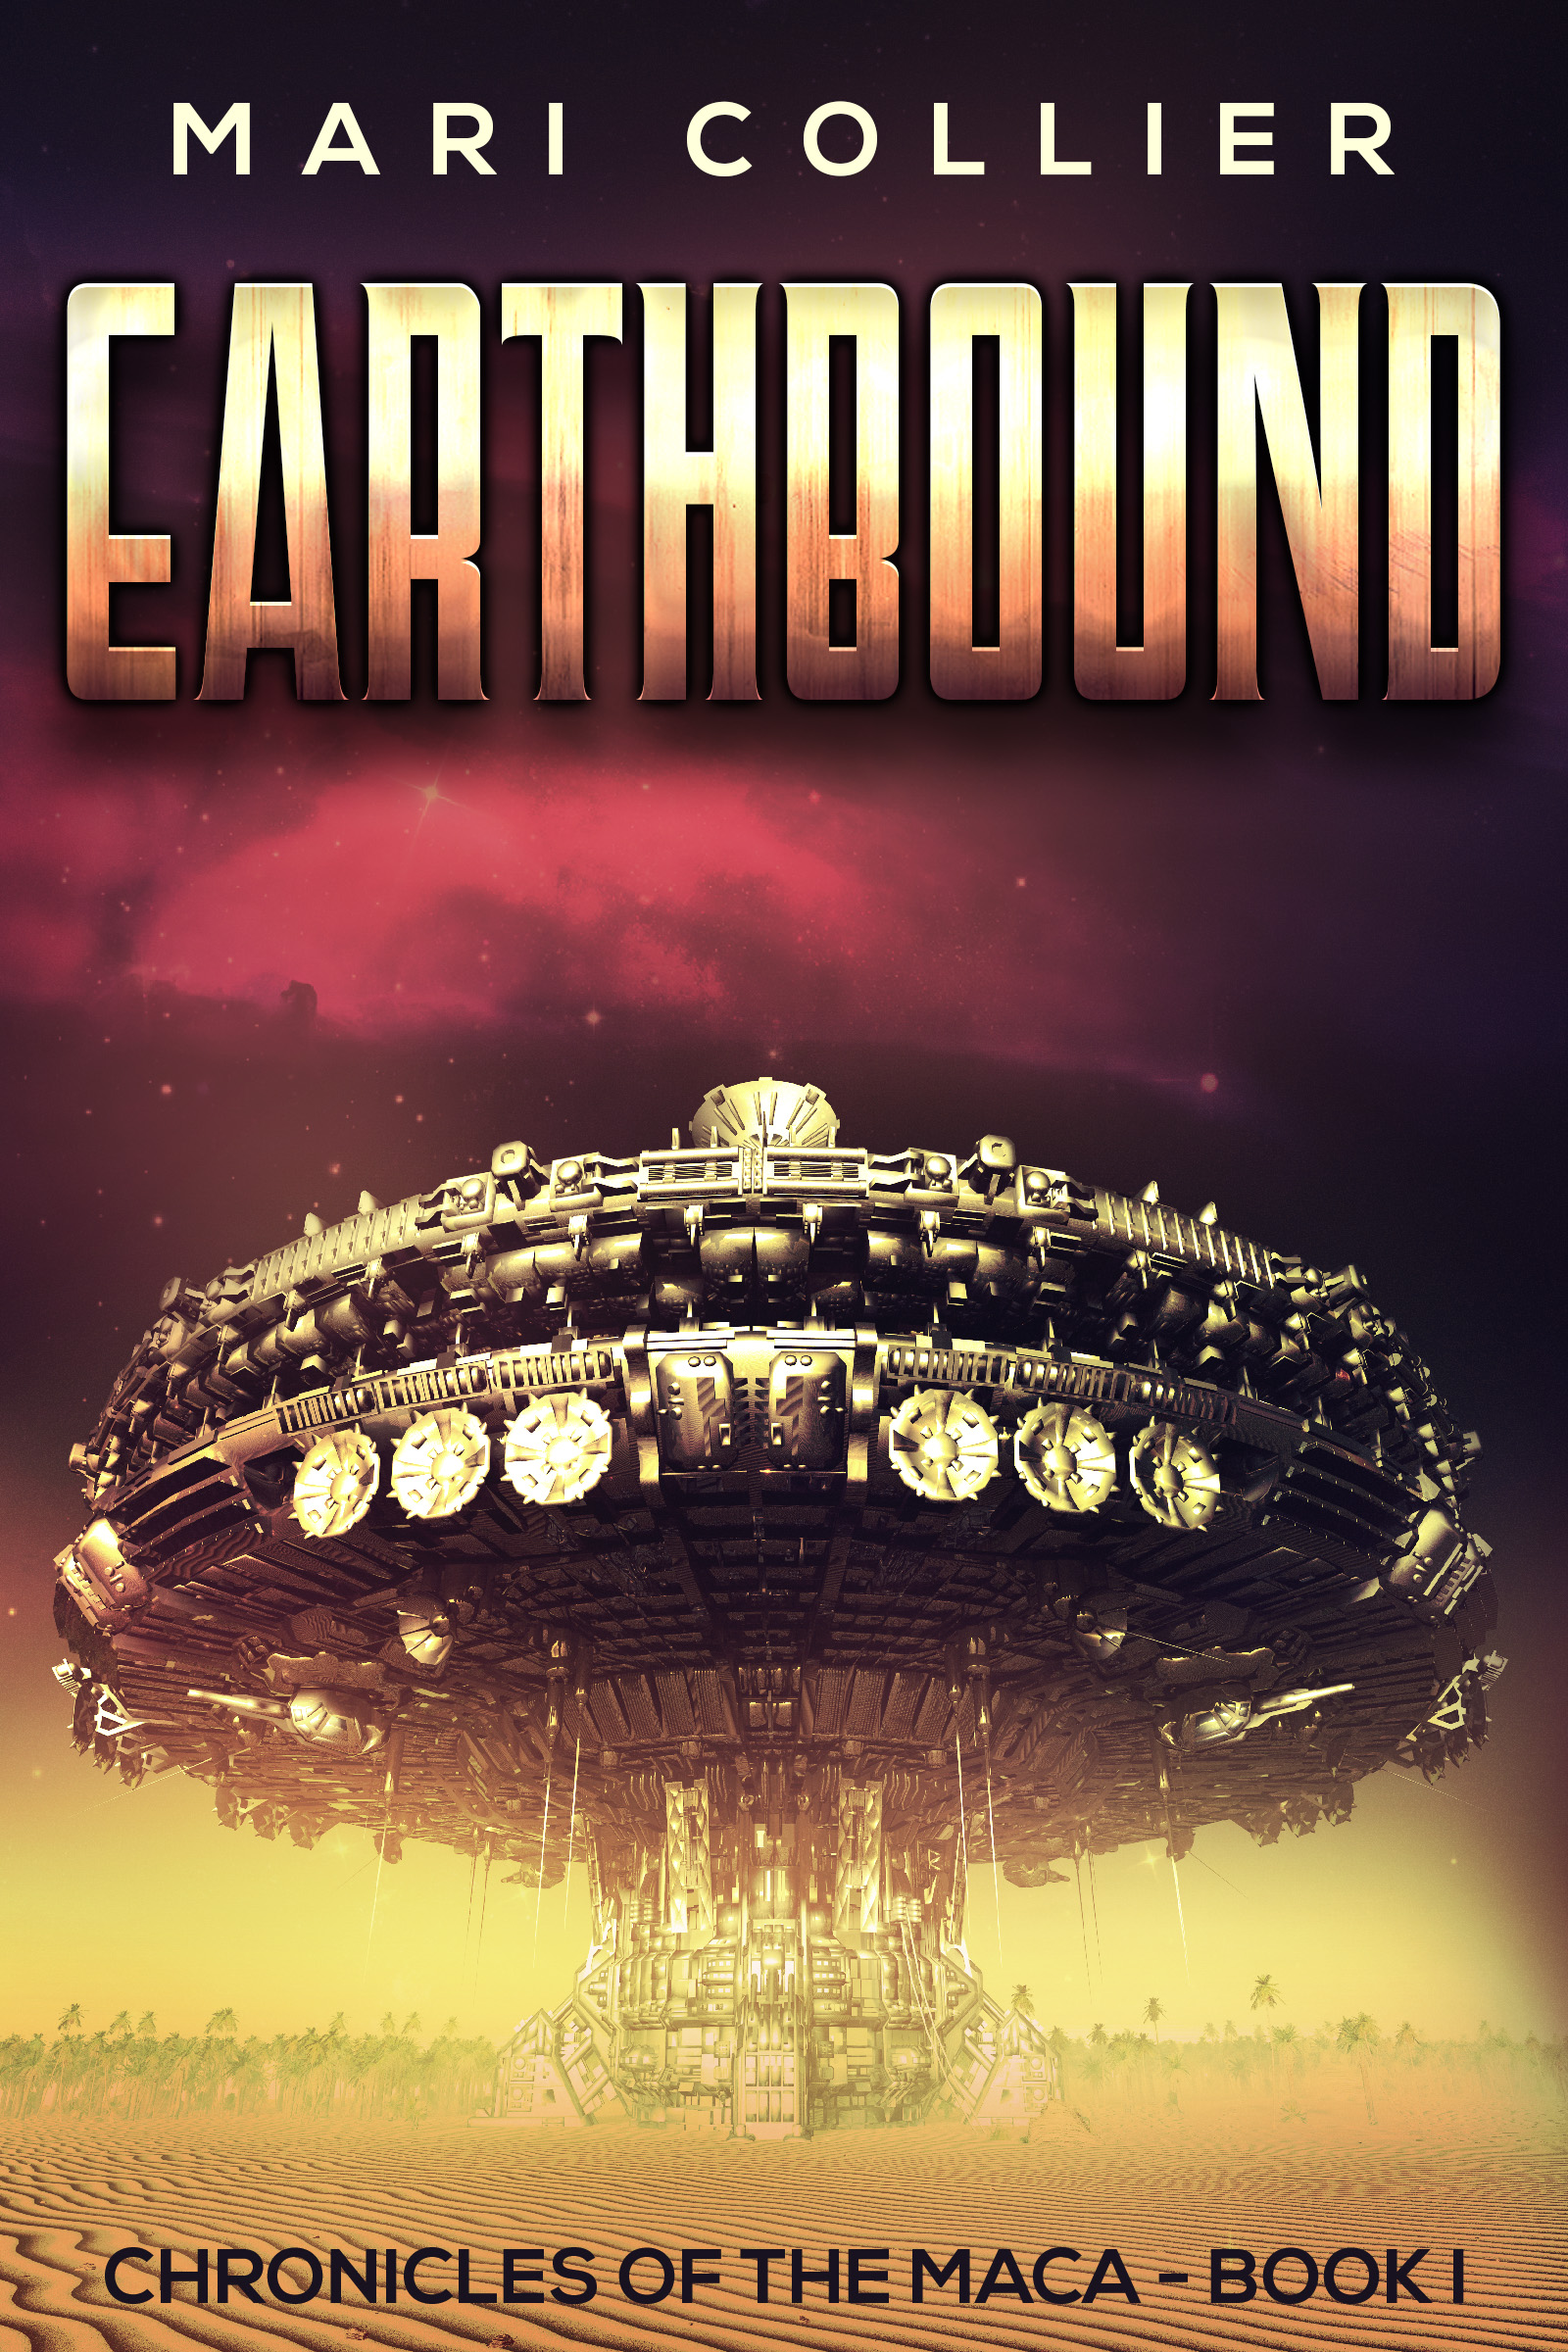 FREE: Earthbound by Mari Collier